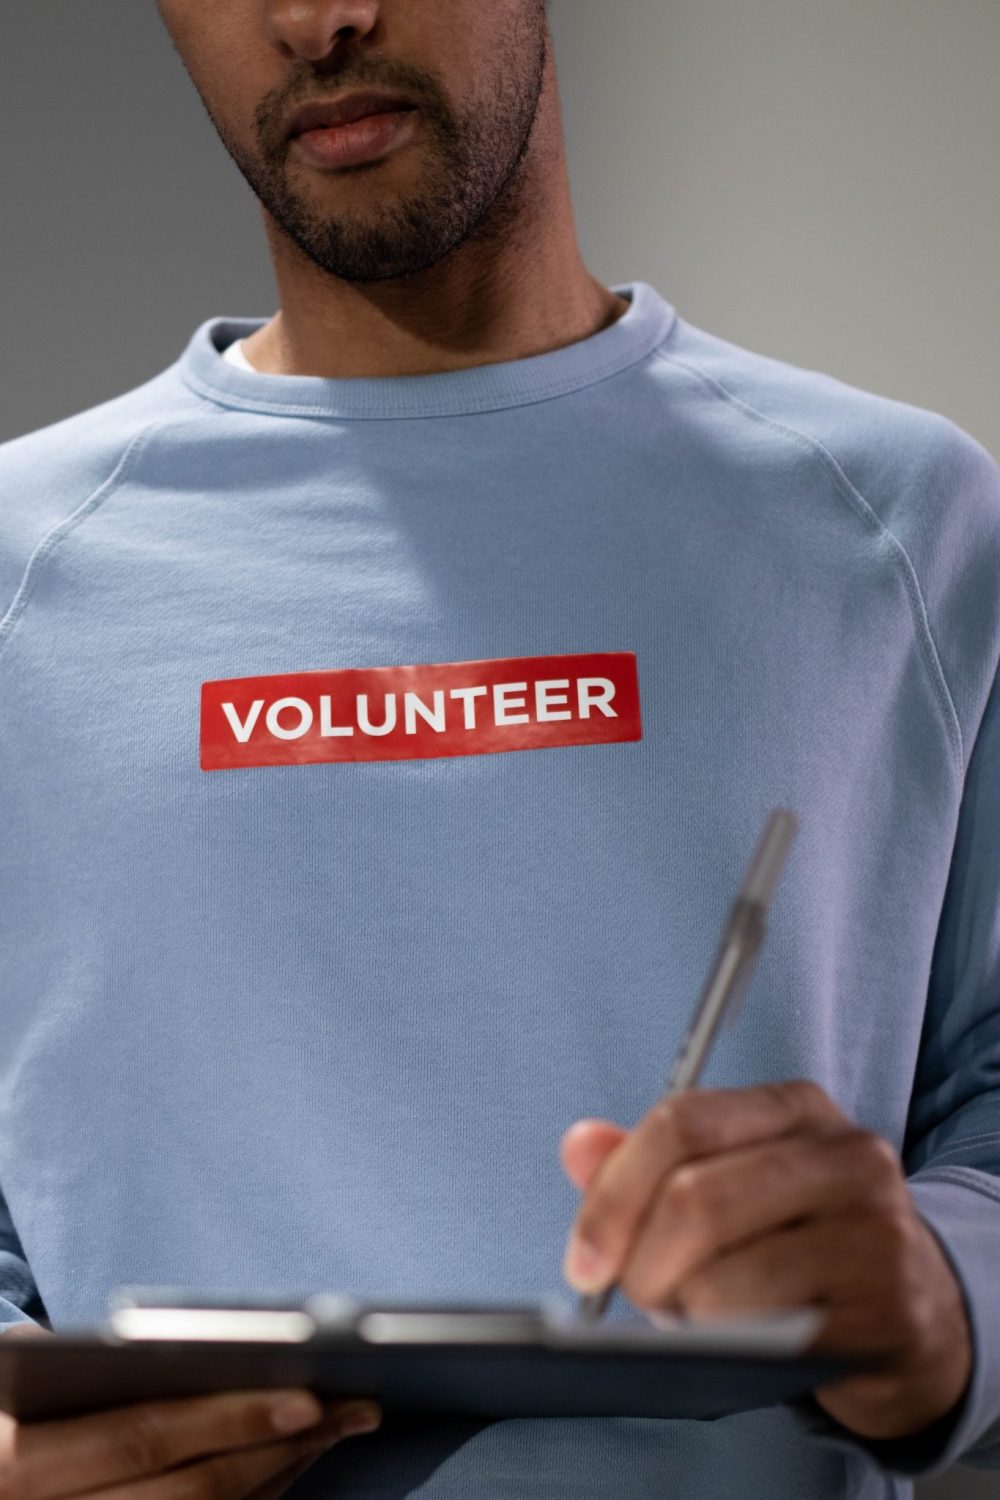 Volunteering is an excellent option if you want to learn more about the world around you.